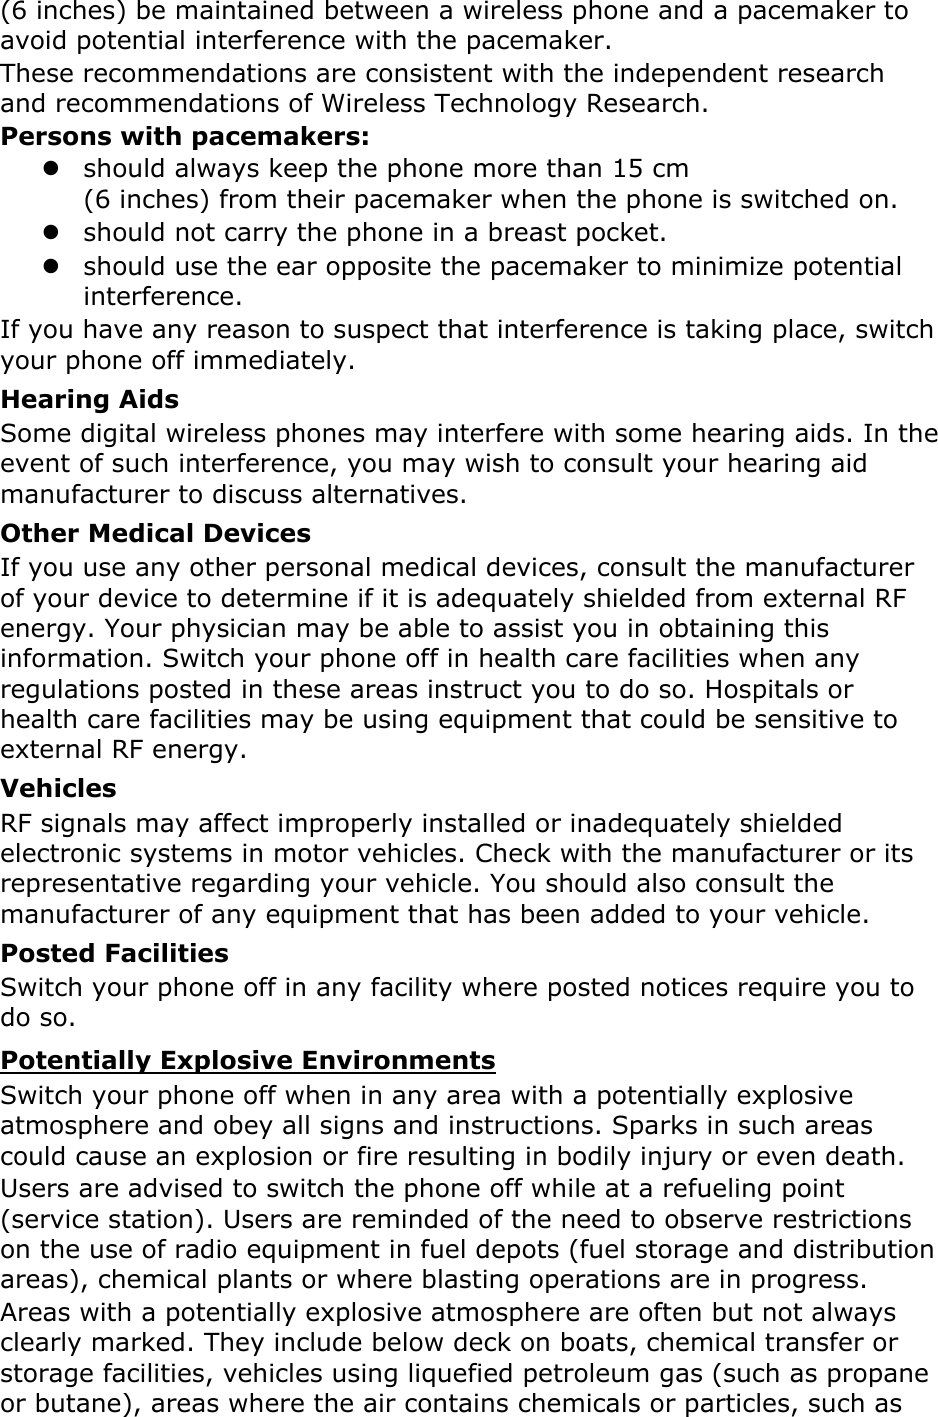 Page 21 of Samsung Electronics Co GTS8600 Cellular/PCS GSM Phone with WLAN and Bluetooth User Manual